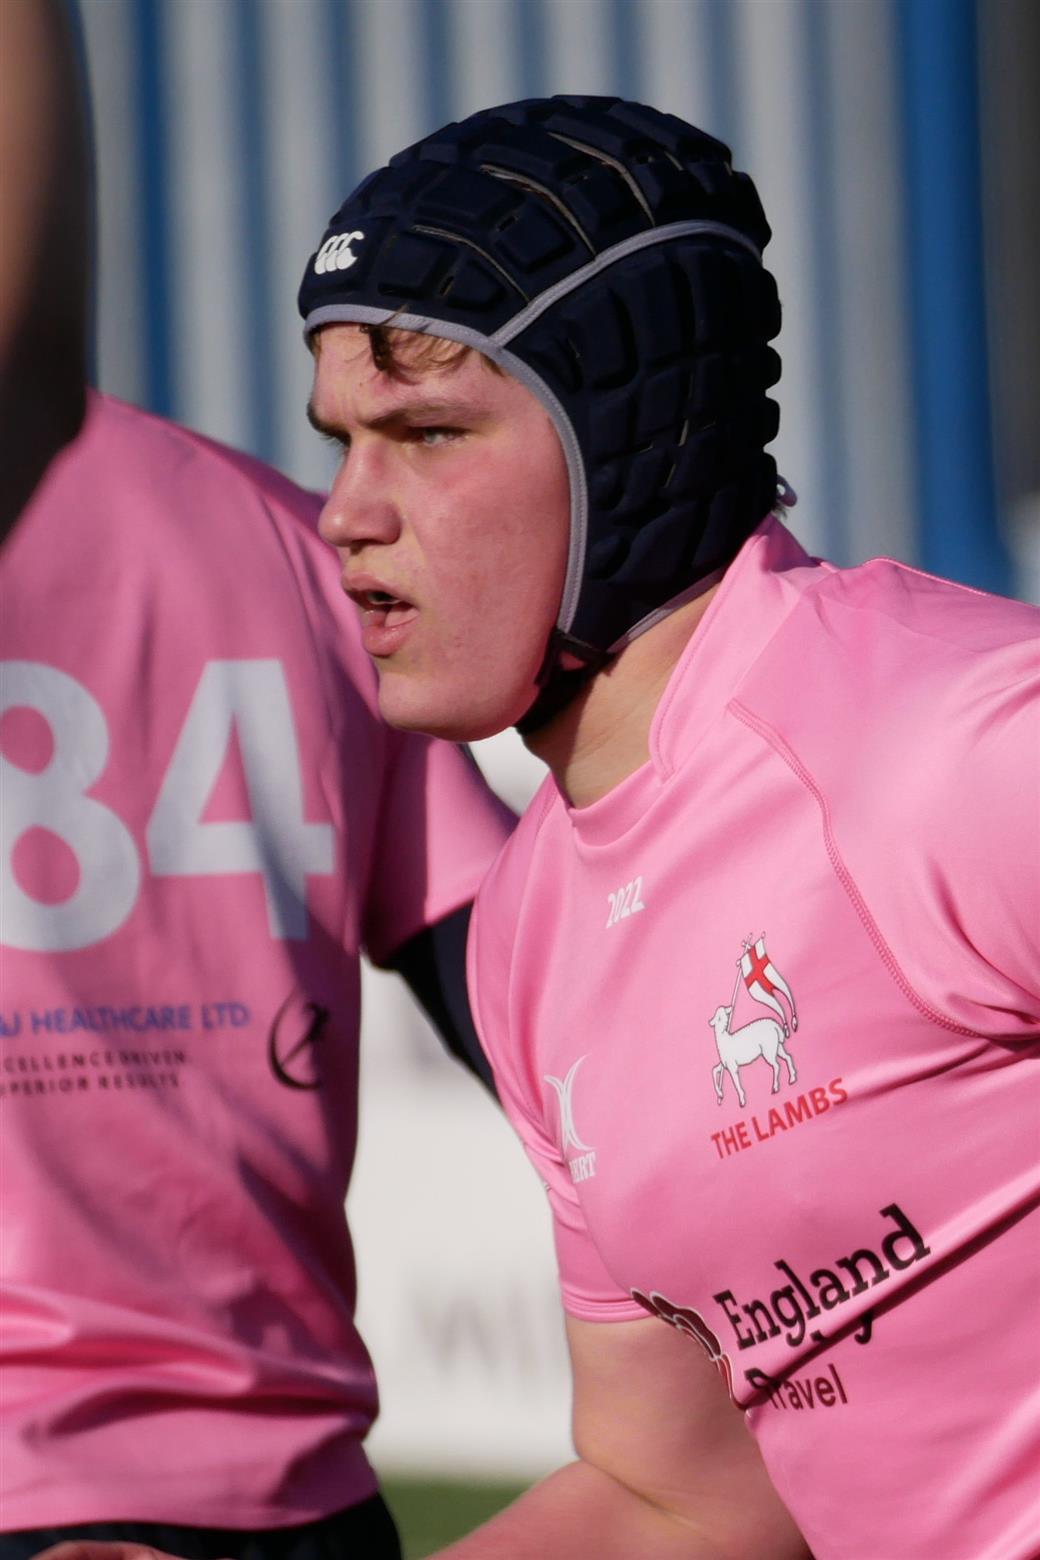 Talented Year 13 student Toby represents The Lambs RFC